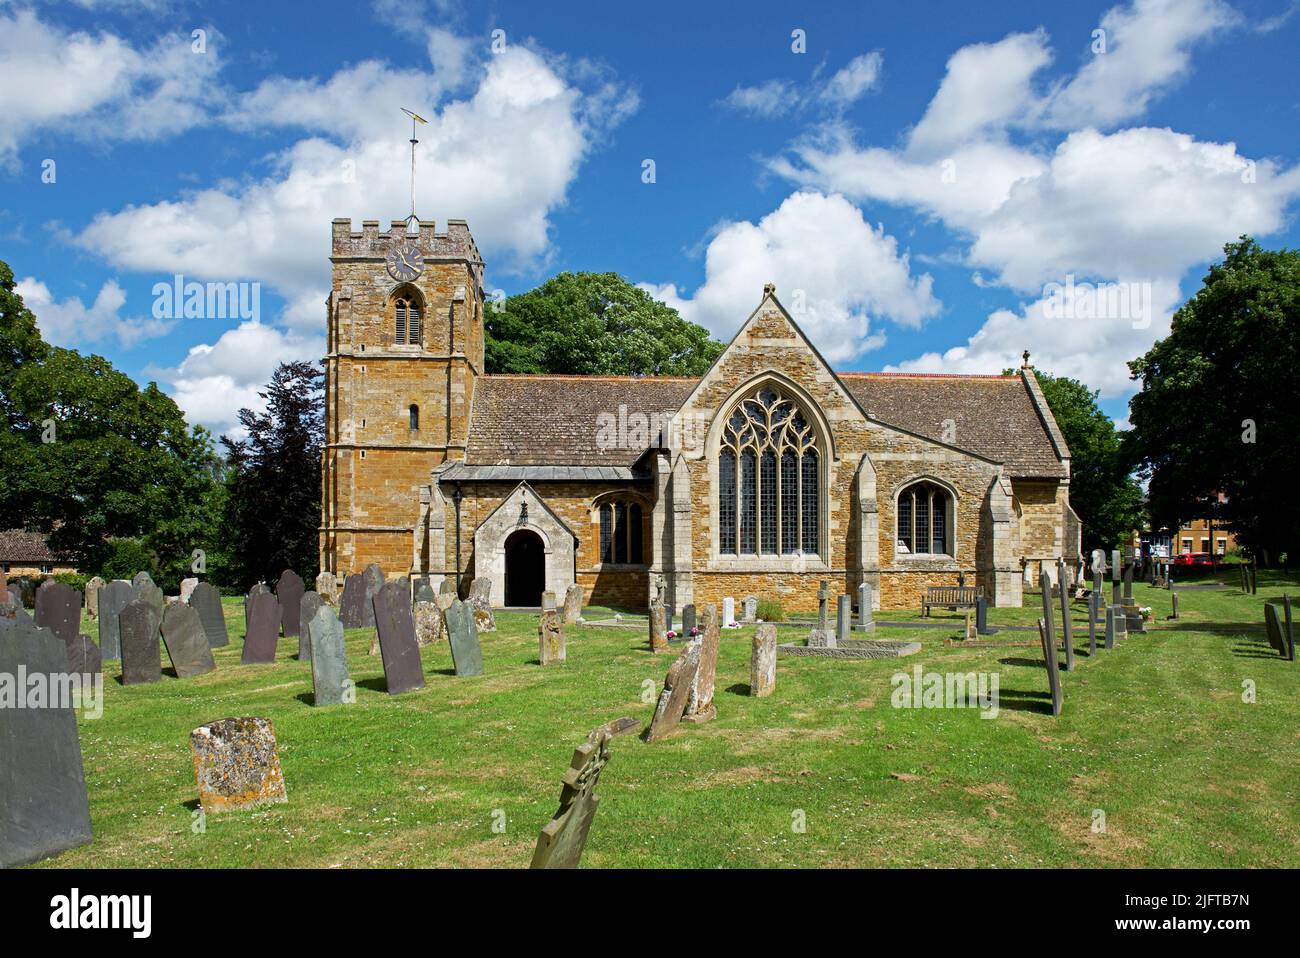 St Giles church in the village of Medbourne, Leicestershire, England UK Stock Photo